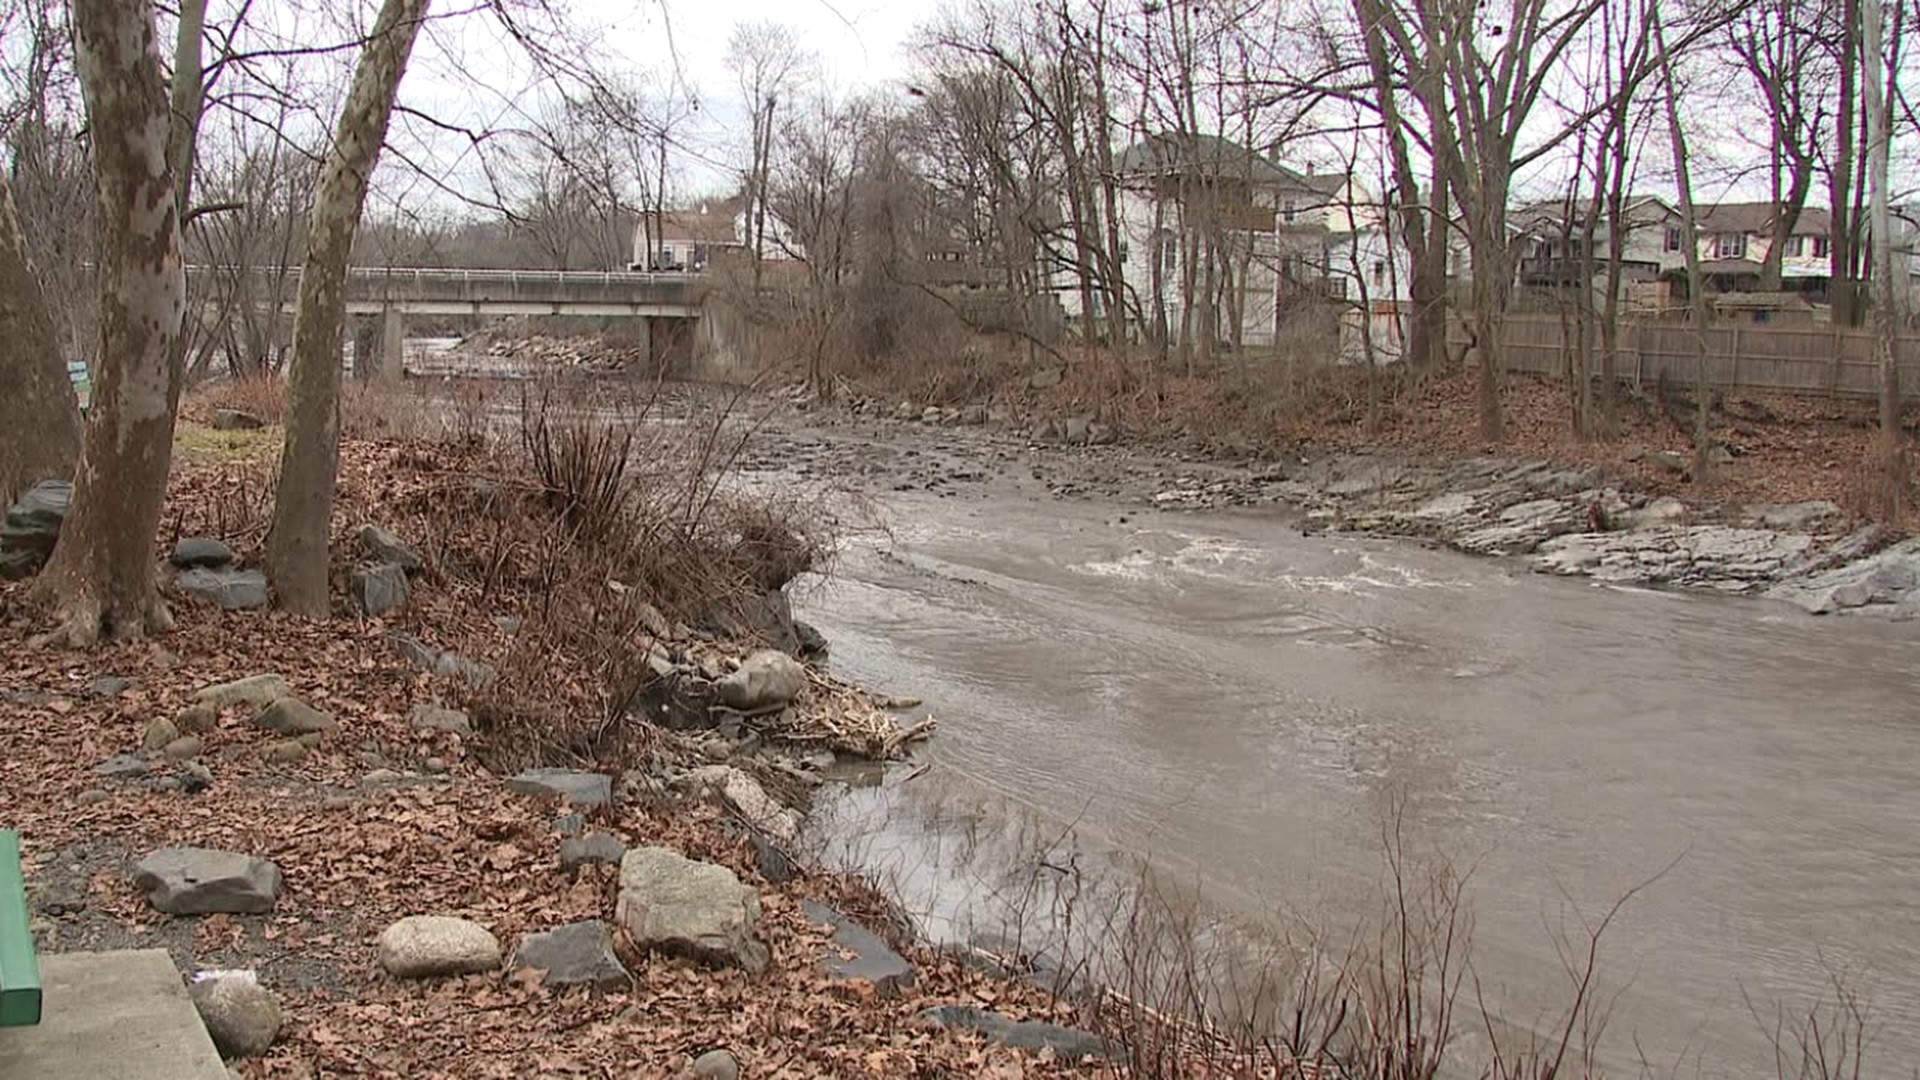 Sediment from a dam project at a reservoir in Dunmore clouded the water of Roaring Brook Creek back in February.